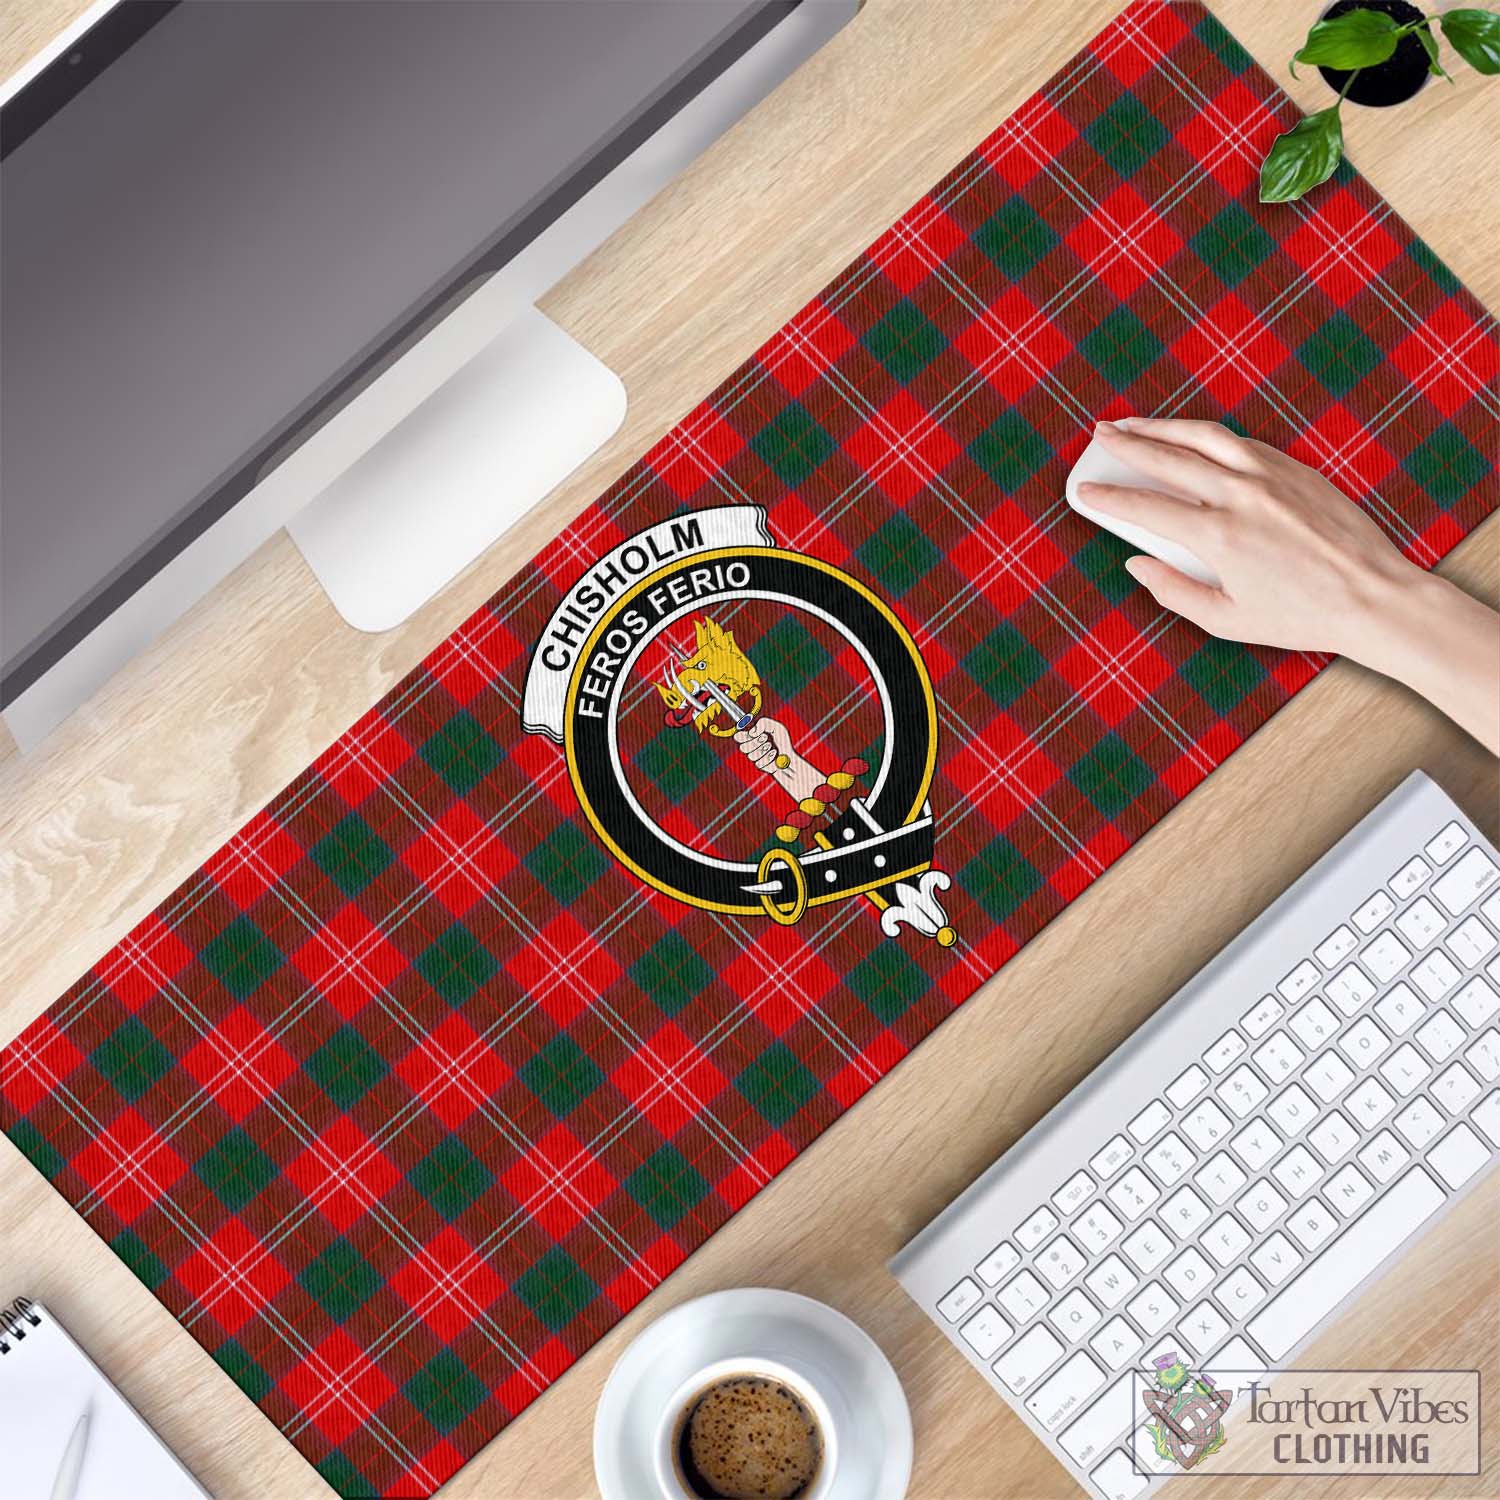 Tartan Vibes Clothing Chisholm Modern Tartan Mouse Pad with Family Crest